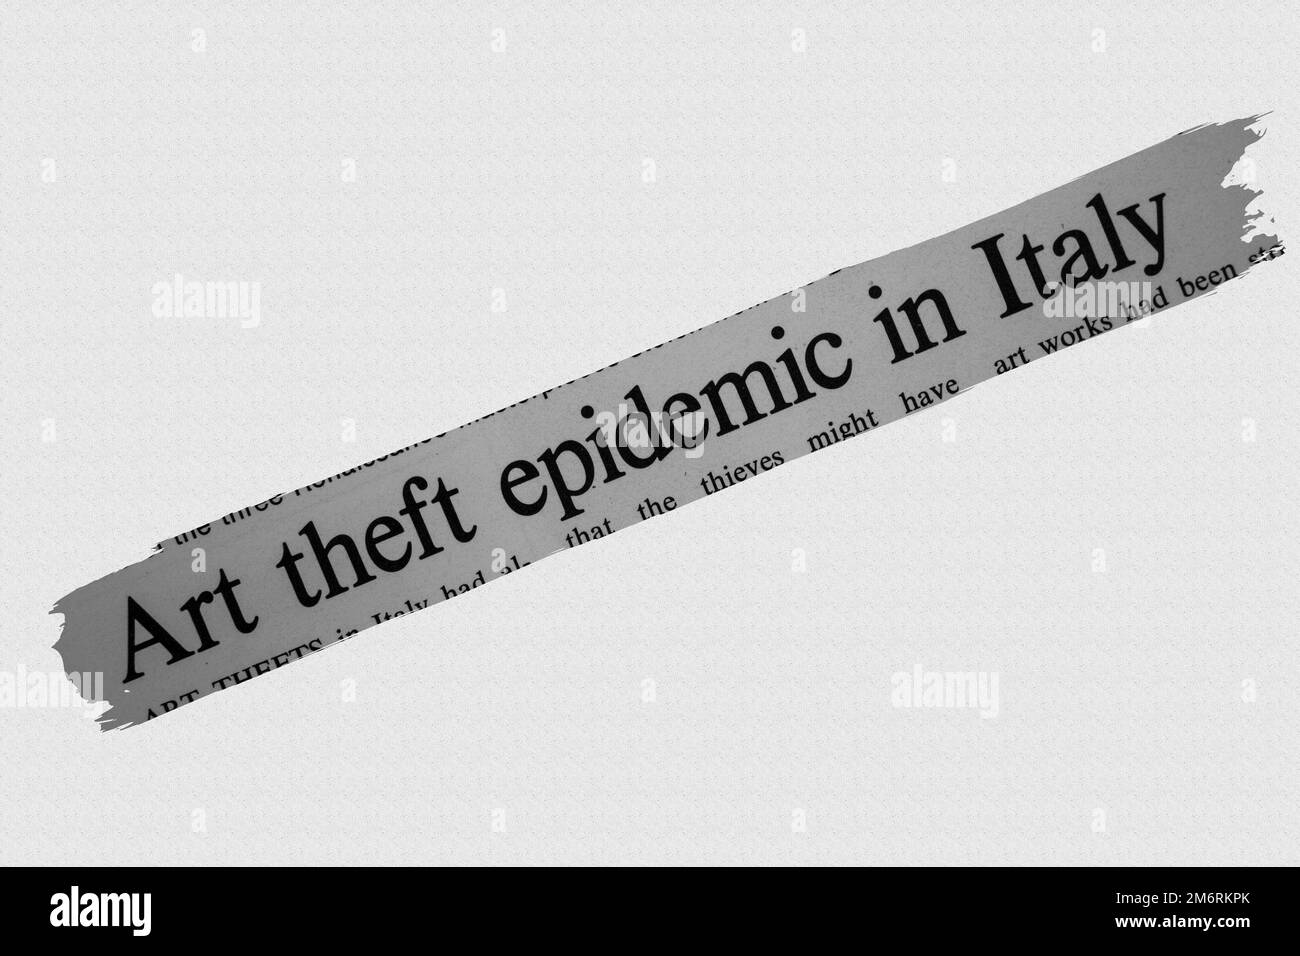 Art theft epidemic in Italy - news story from 1975 newspaper headline article title - overlay Stock Photo